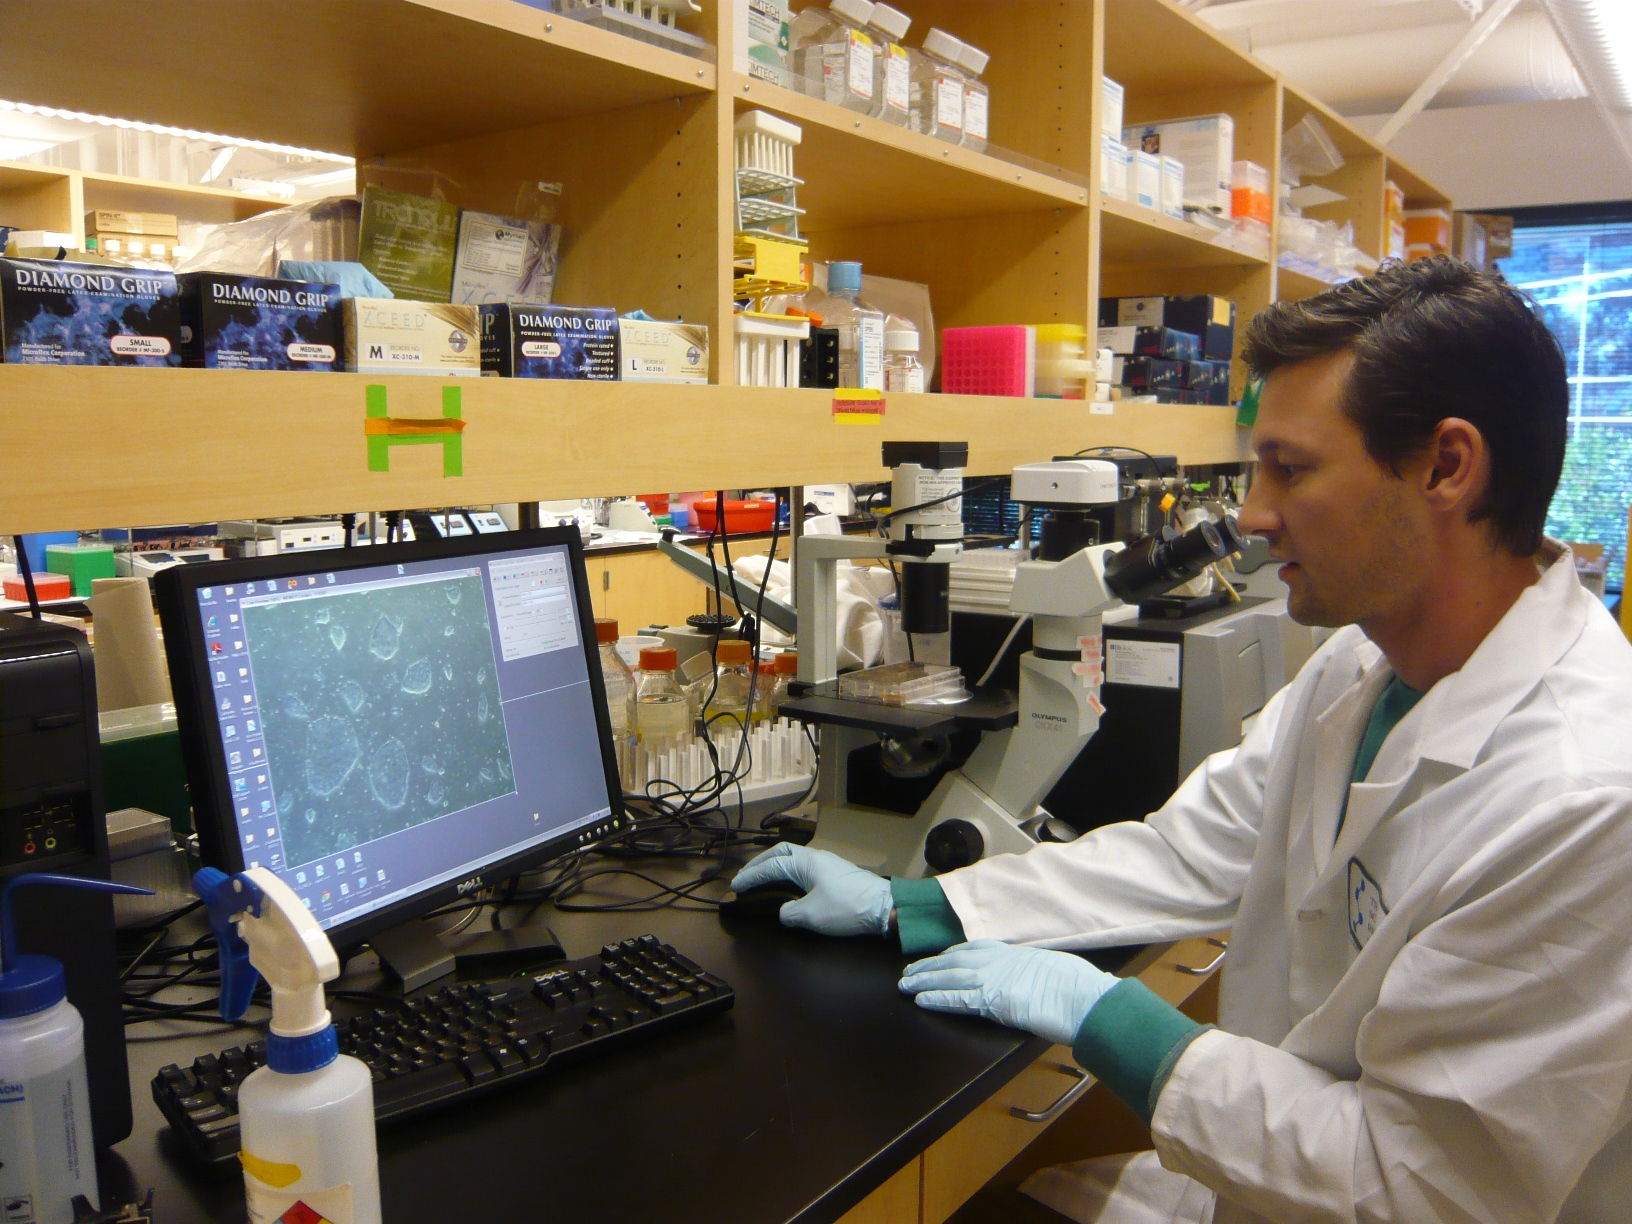 A stem cell researcher at the Scripps Institute in San Diego